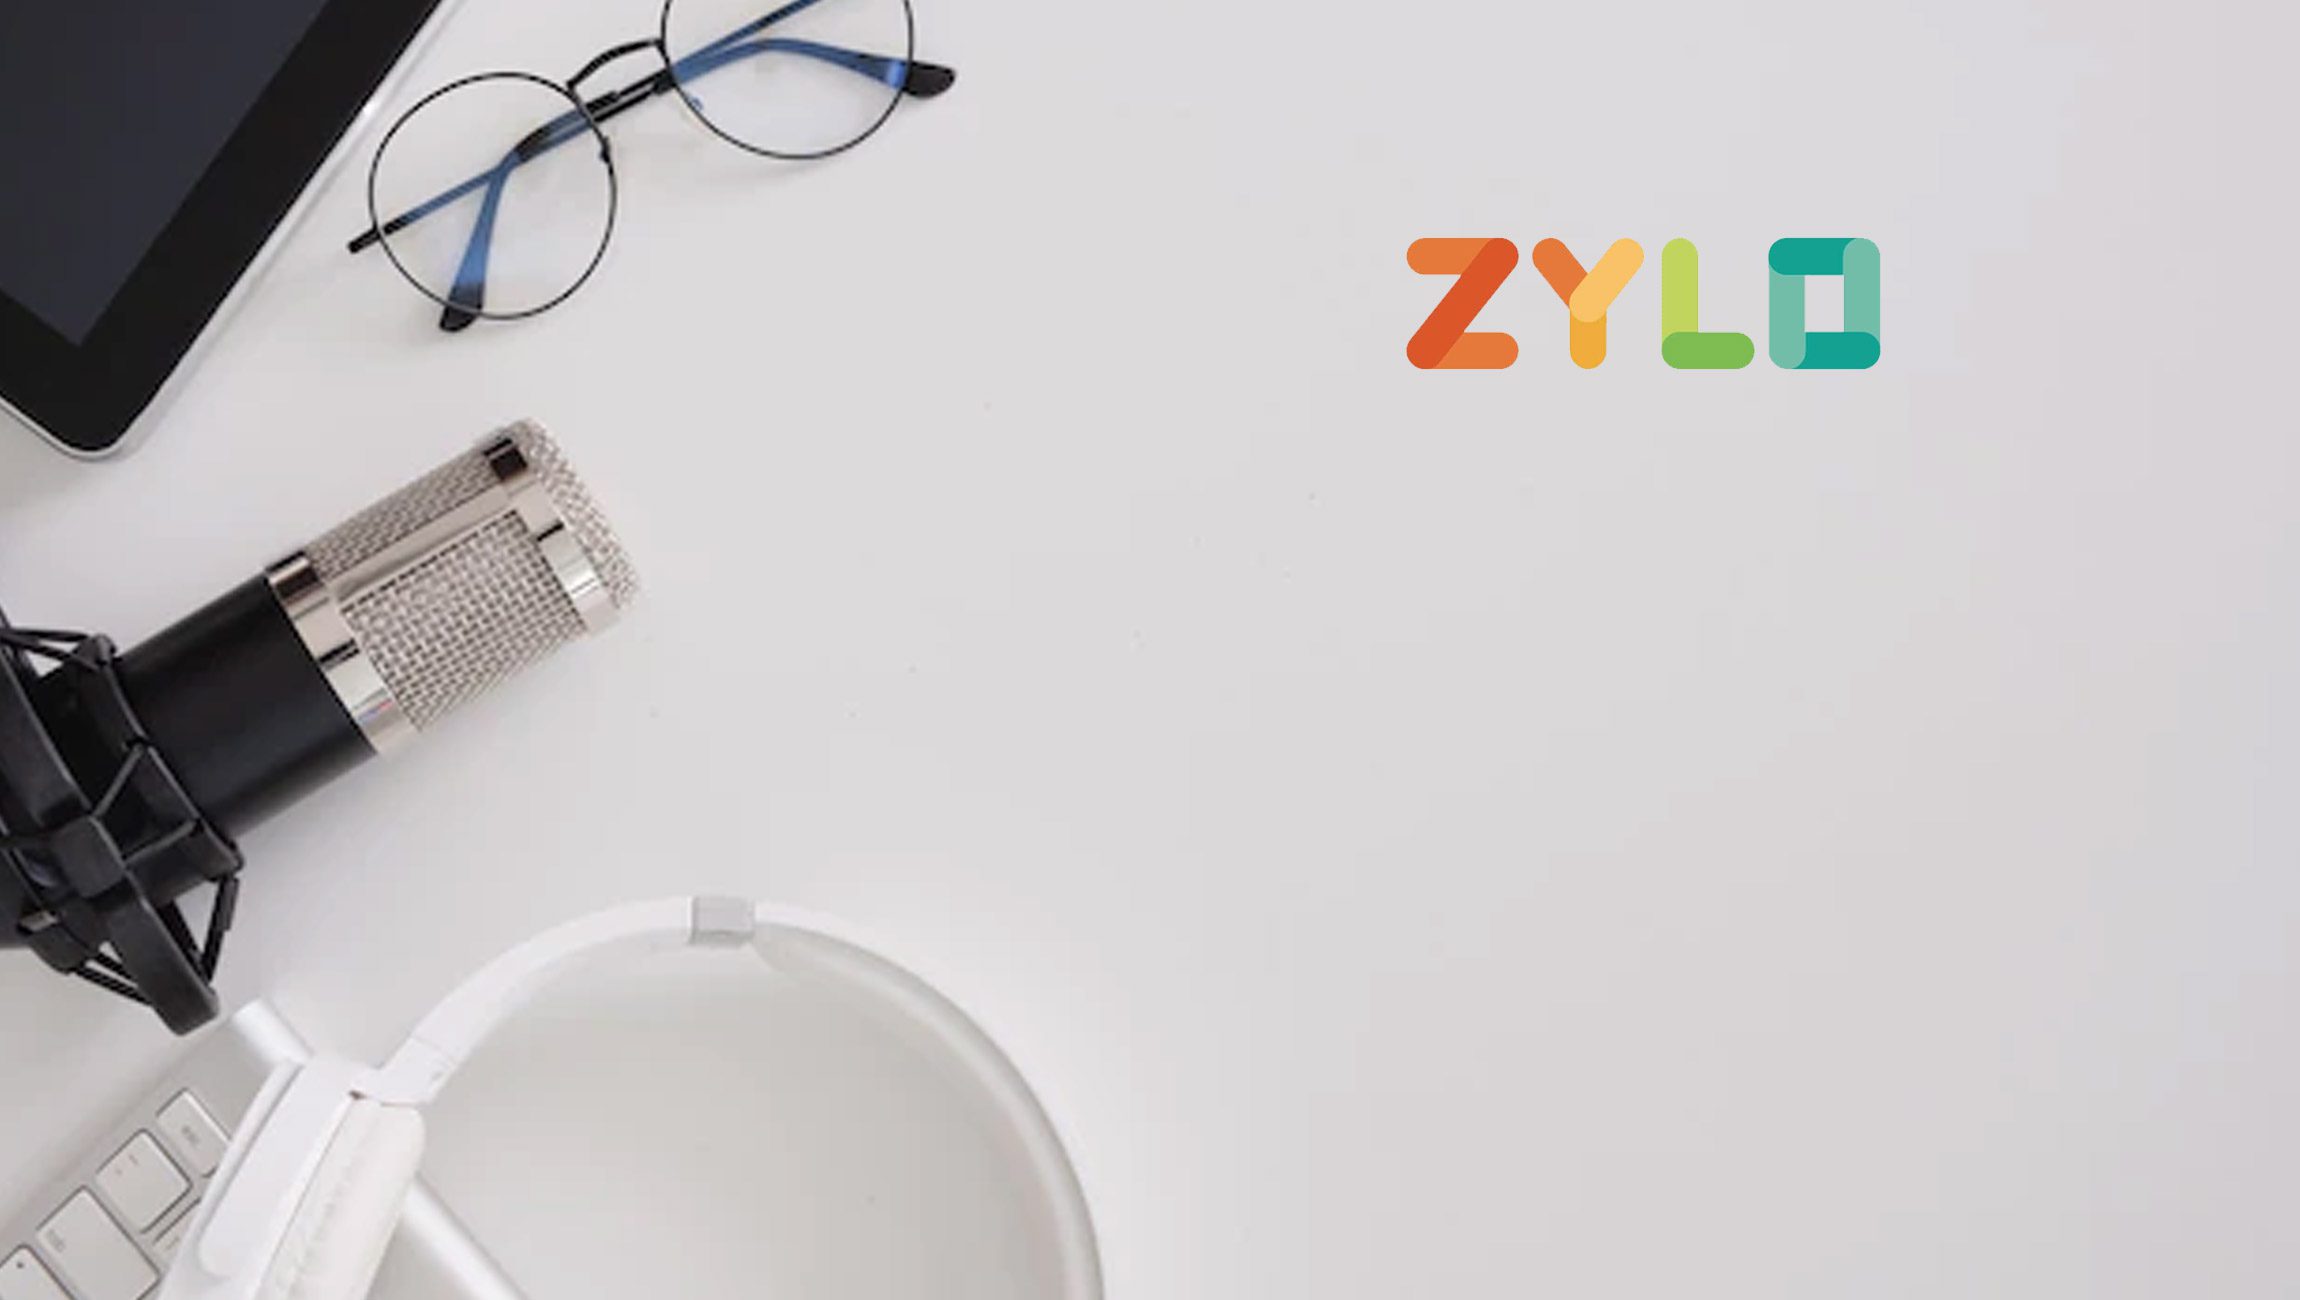 Zylo Debuts “SaaSMe Unfiltered: The SaaS Management Podcast” To Help Organizations Maximize SaaS Investments